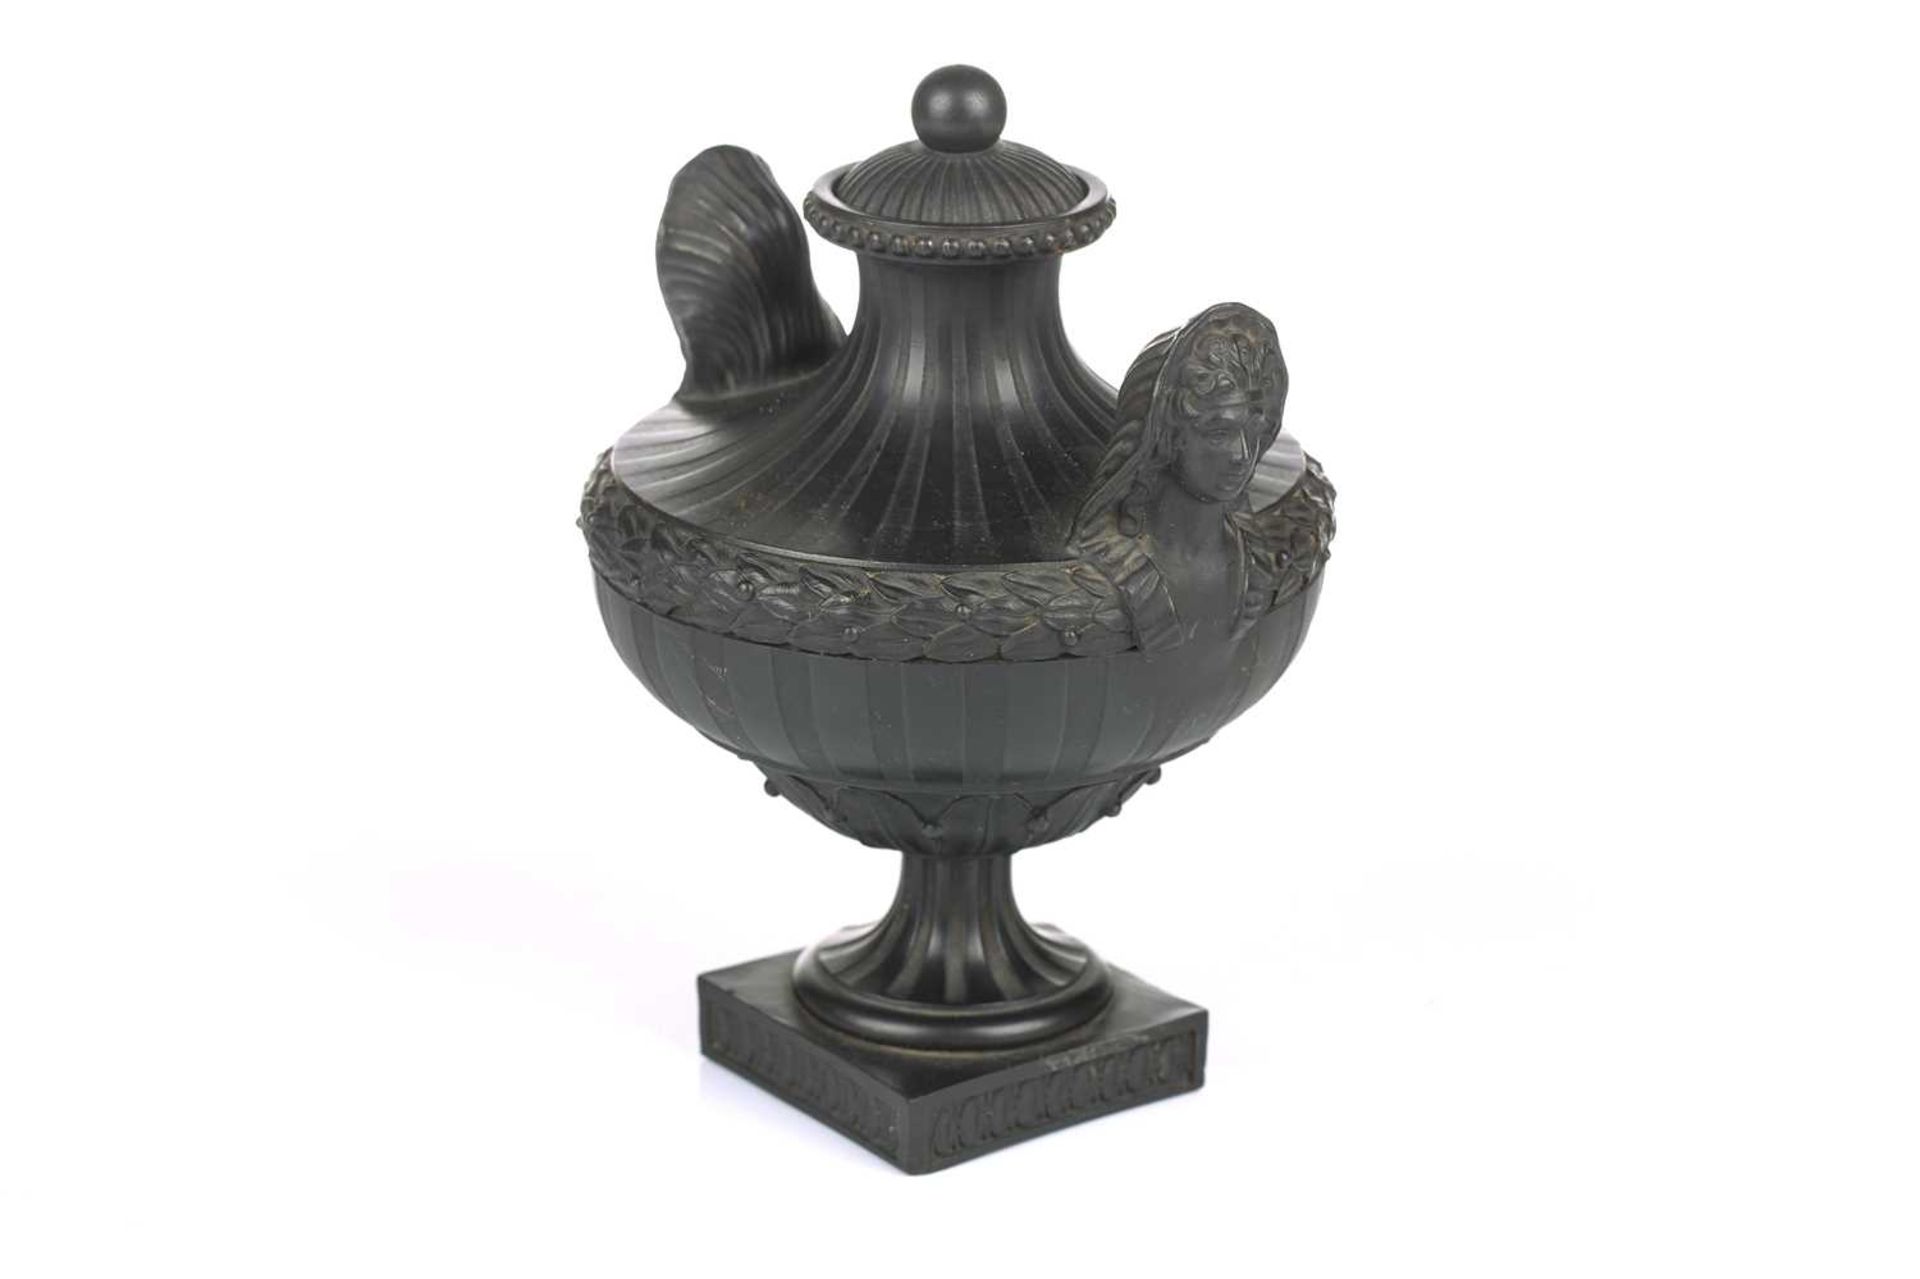 Wedgwood & Bentley, Etruria: a late 18th century black basalt urn and cover, of Classical form - Image 5 of 15